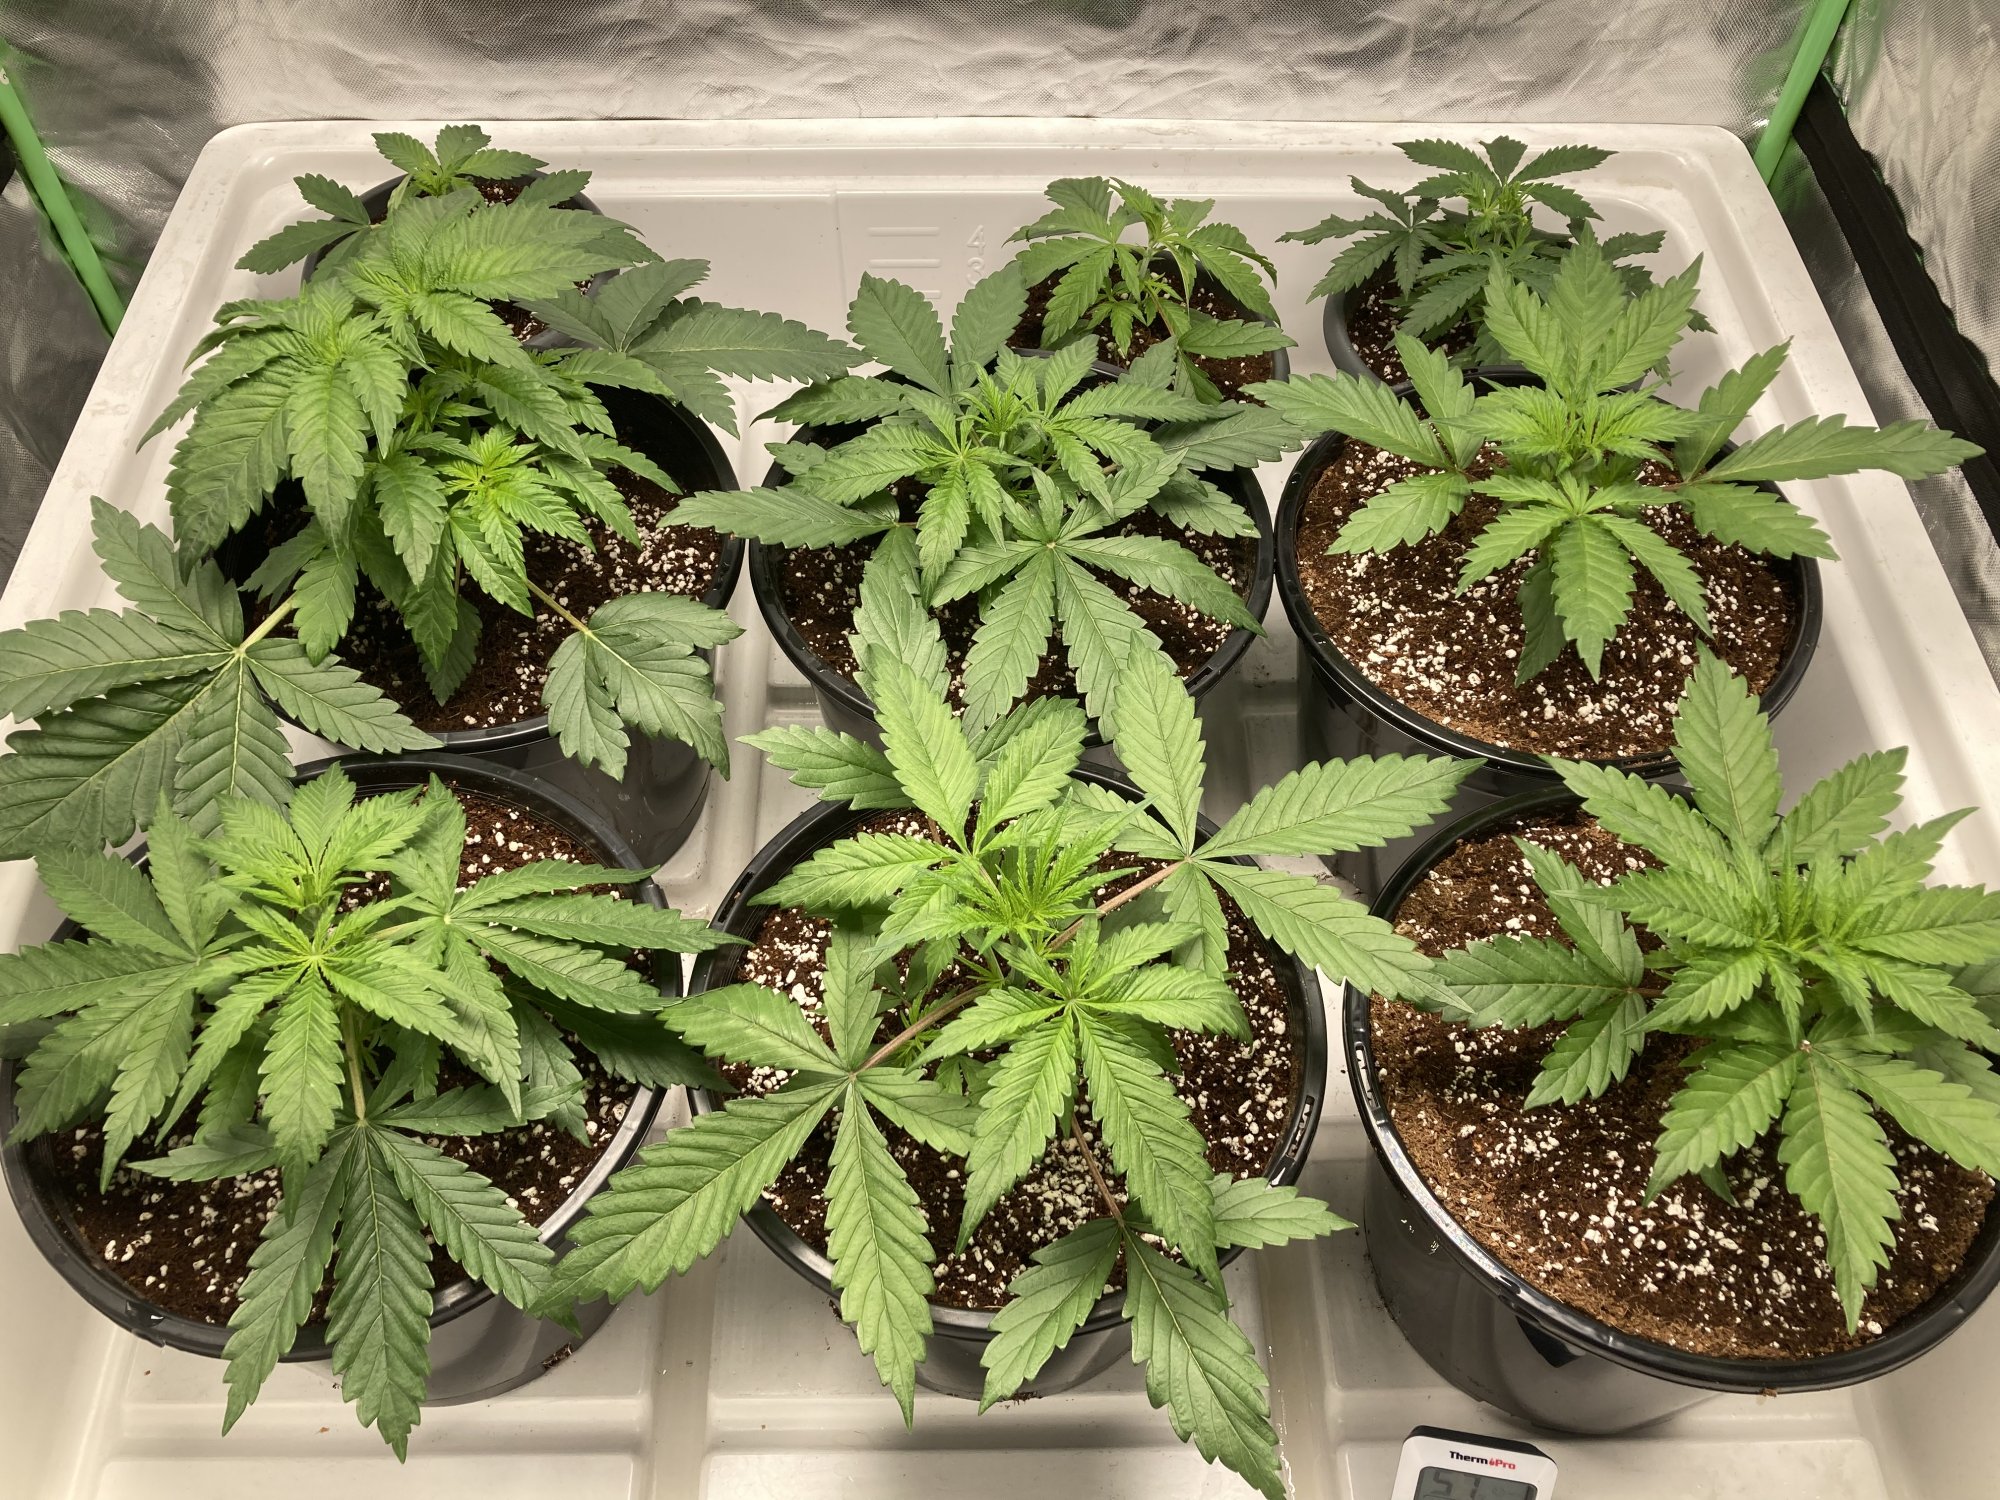 Plants looking good today day 20